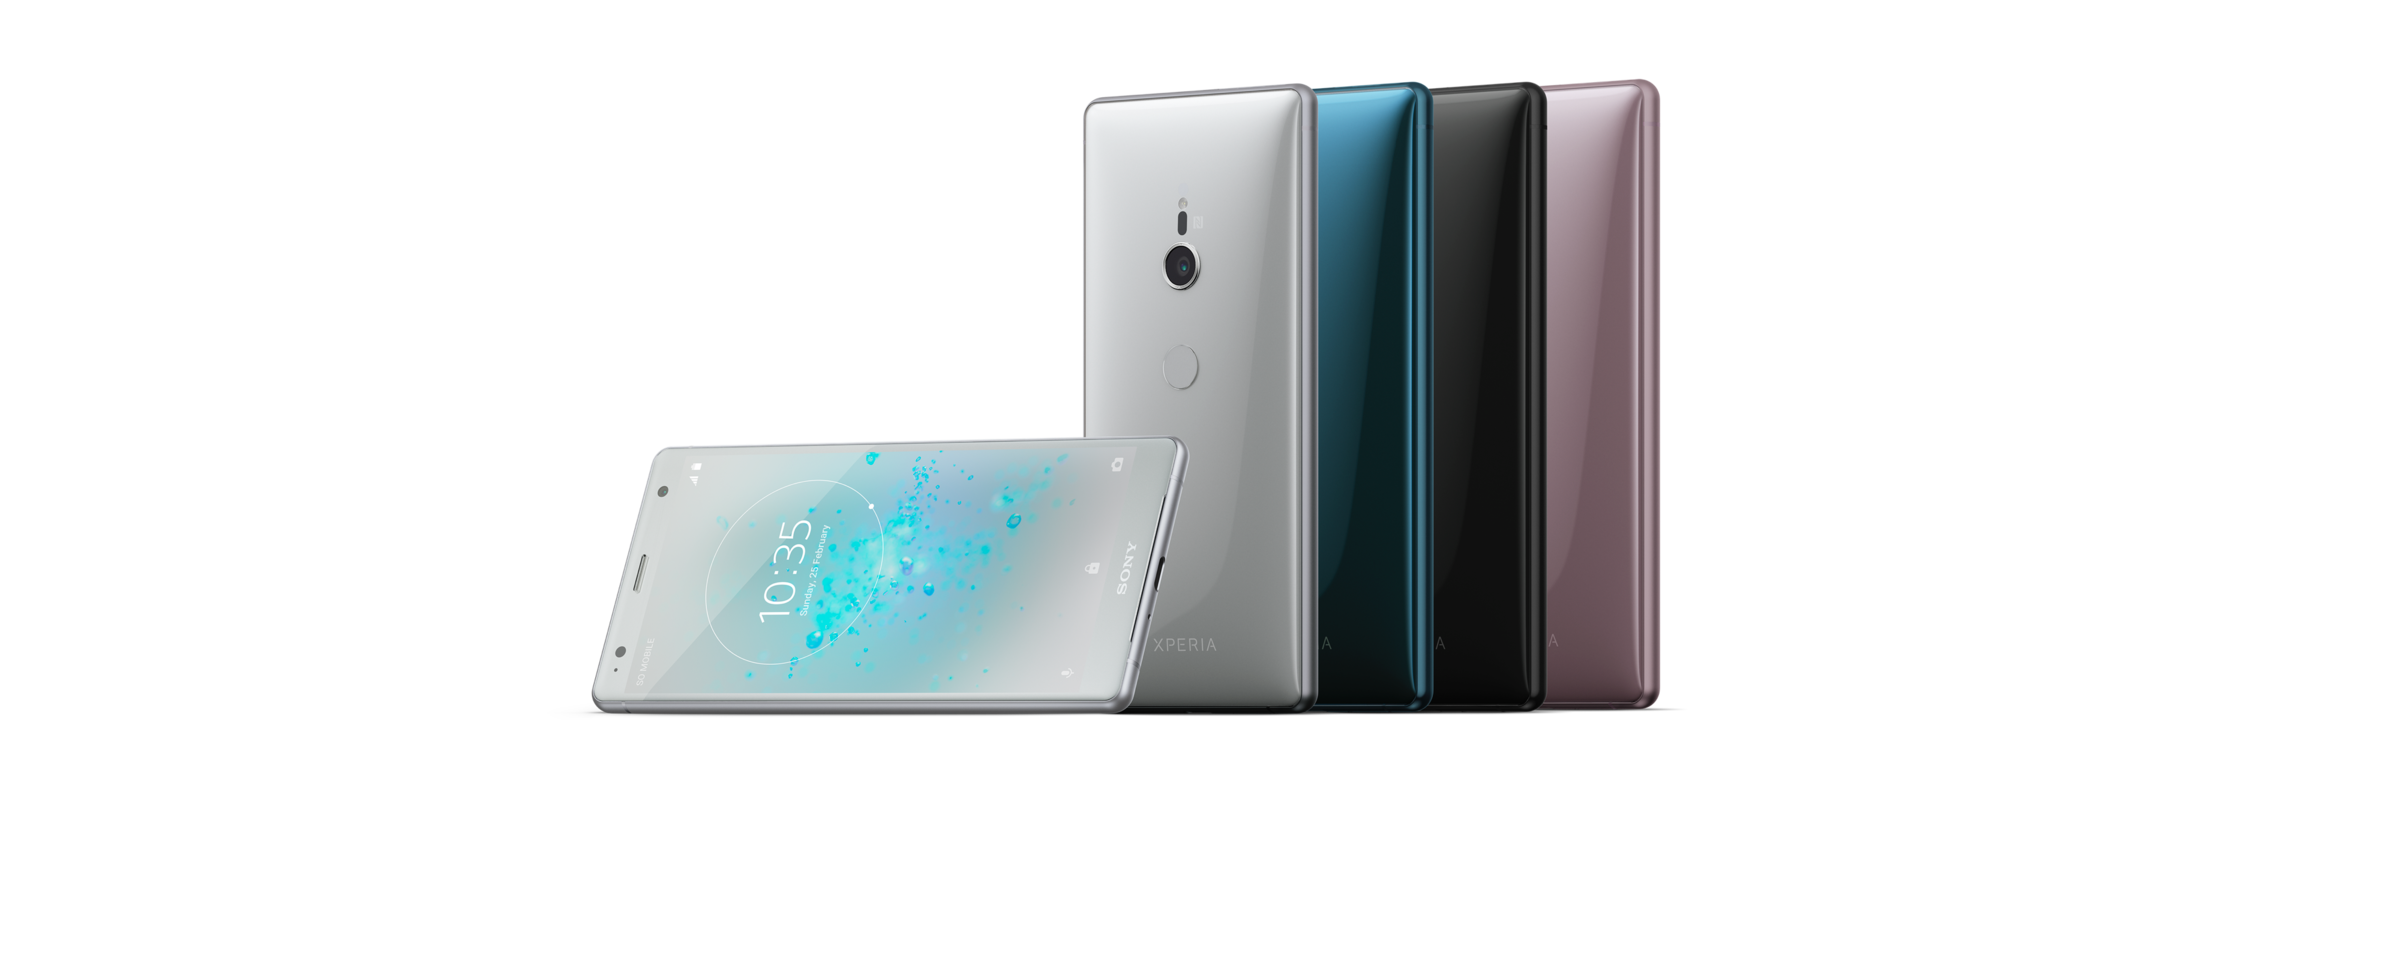 Sony Xperia XZ2 and XZ2 Compact now available for pre-order in the US